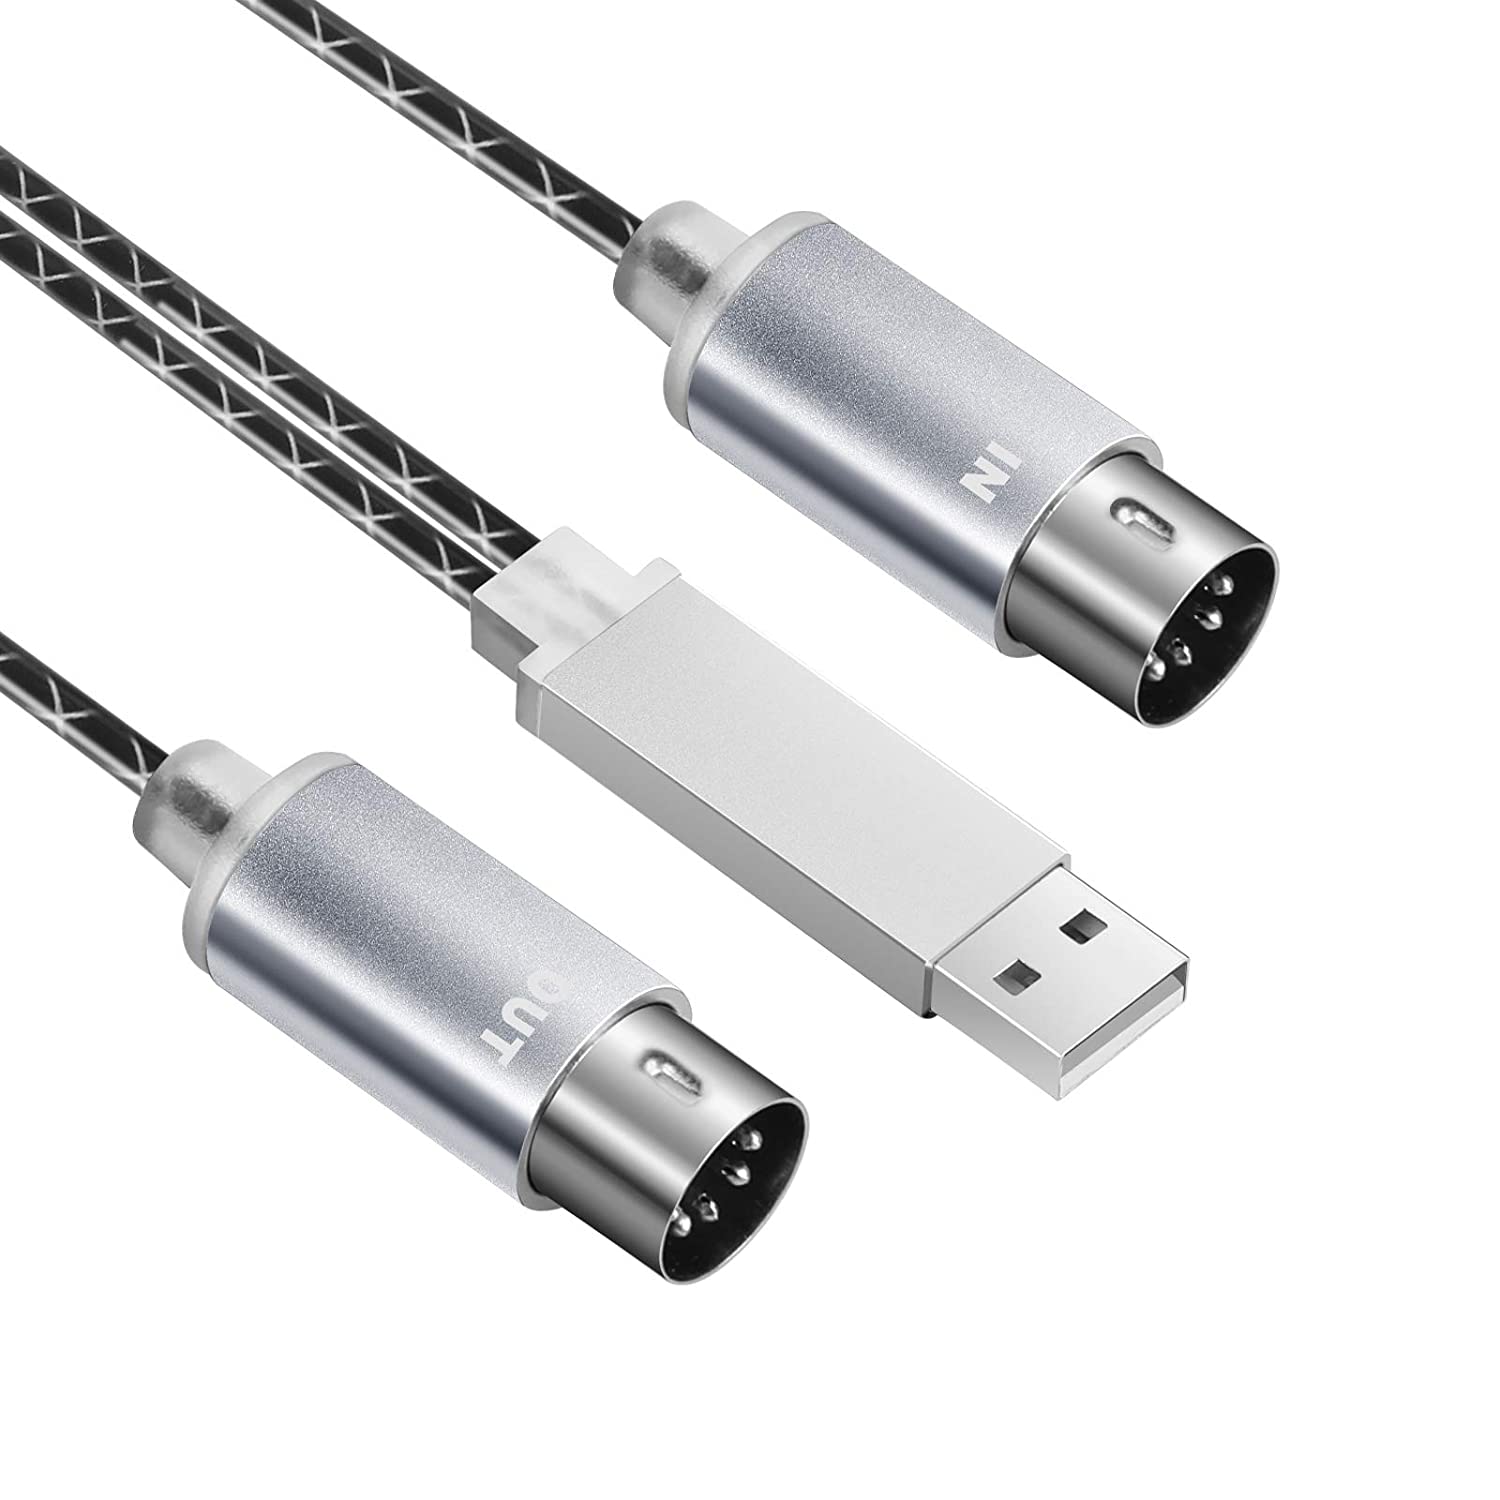 HAVIT 5 Pin MIDI to USB Cable with Indicator